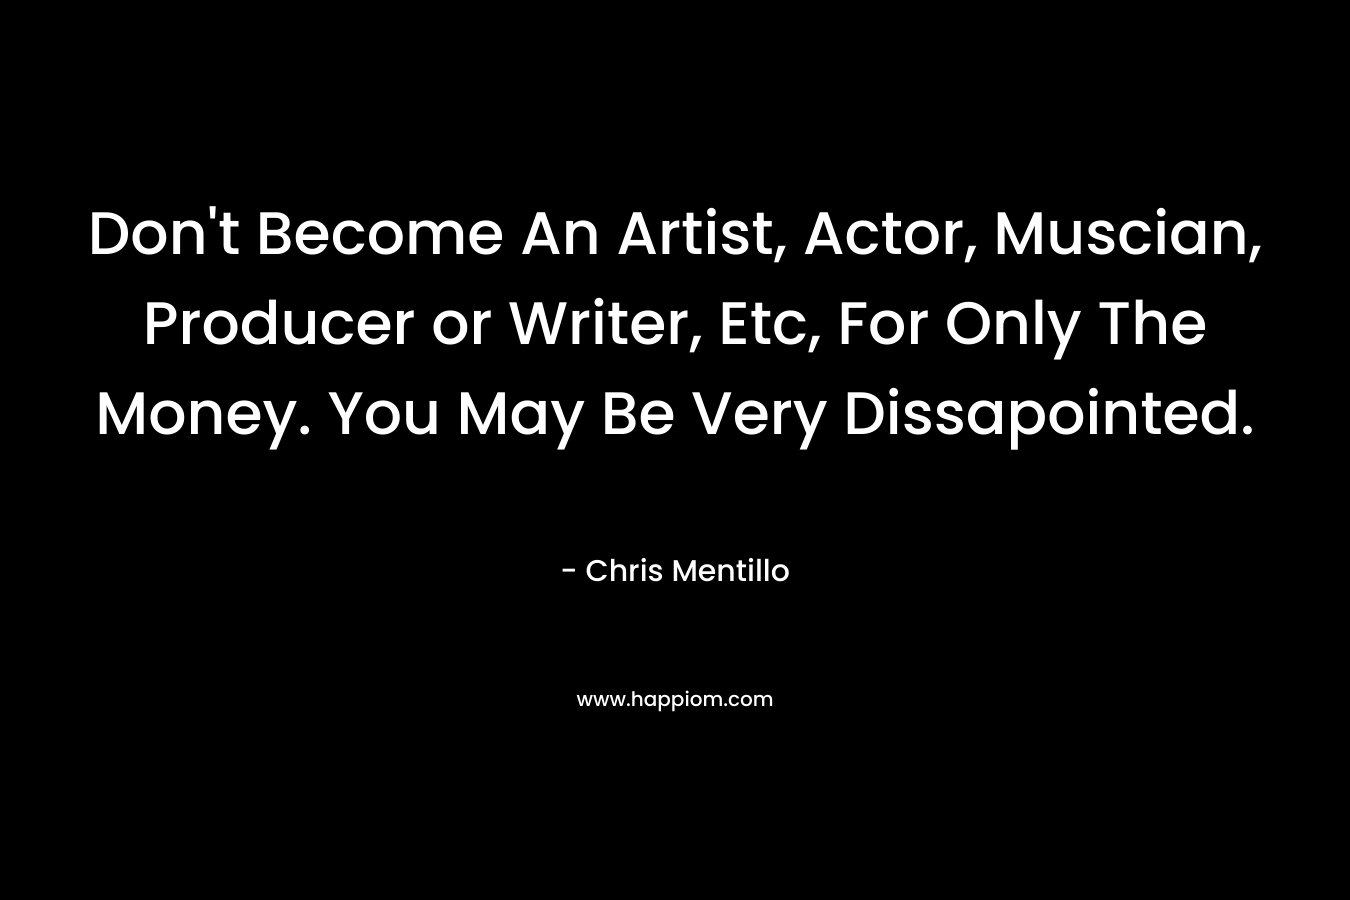 Don't Become An Artist, Actor, Muscian, Producer or Writer, Etc, For Only The Money. You May Be Very Dissapointed.